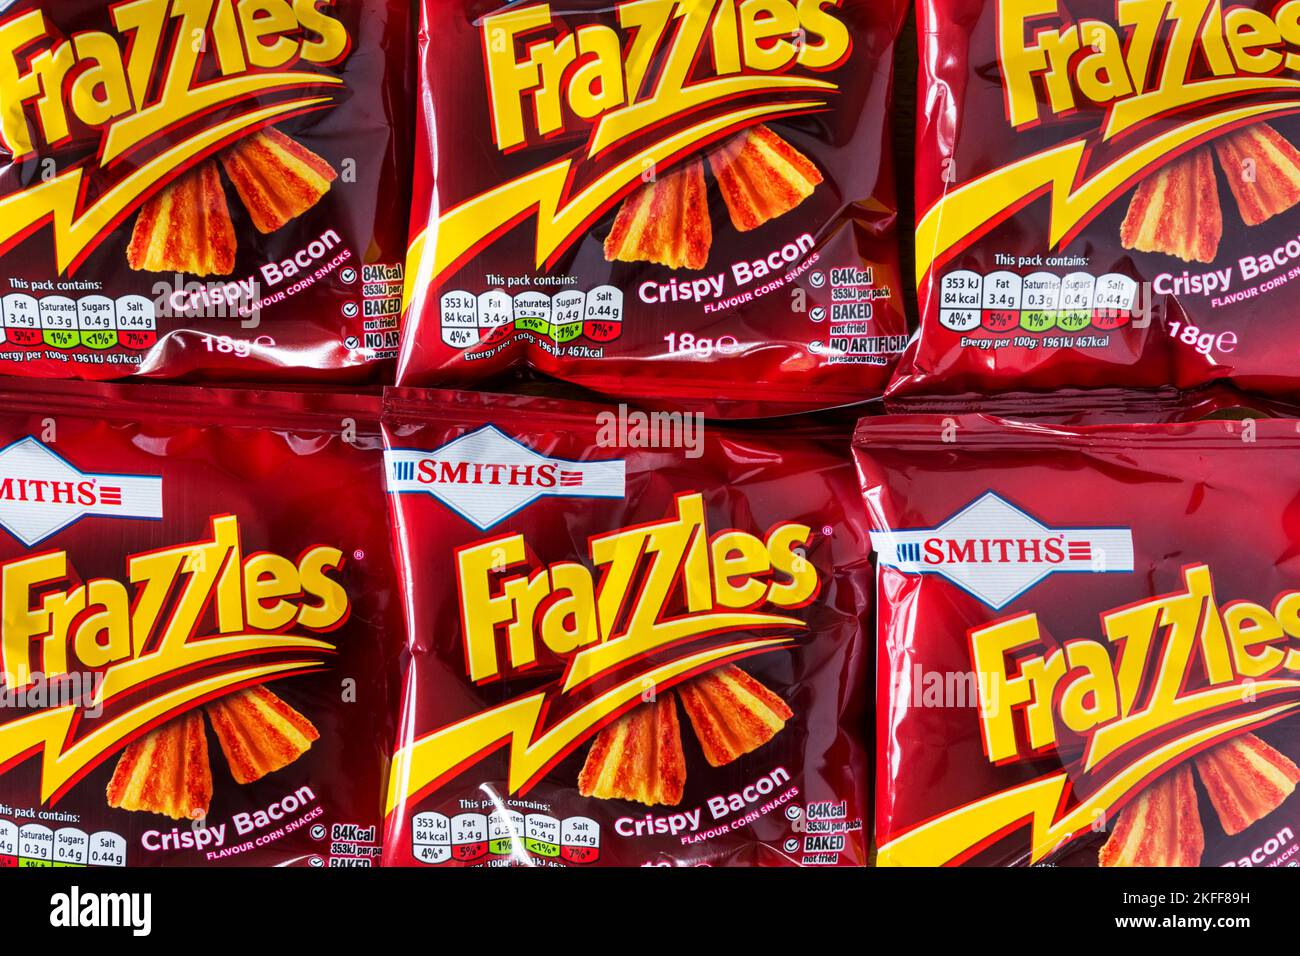 Packets of crispy bacon flavour Frazzles, made by Smiths. Stock Photo